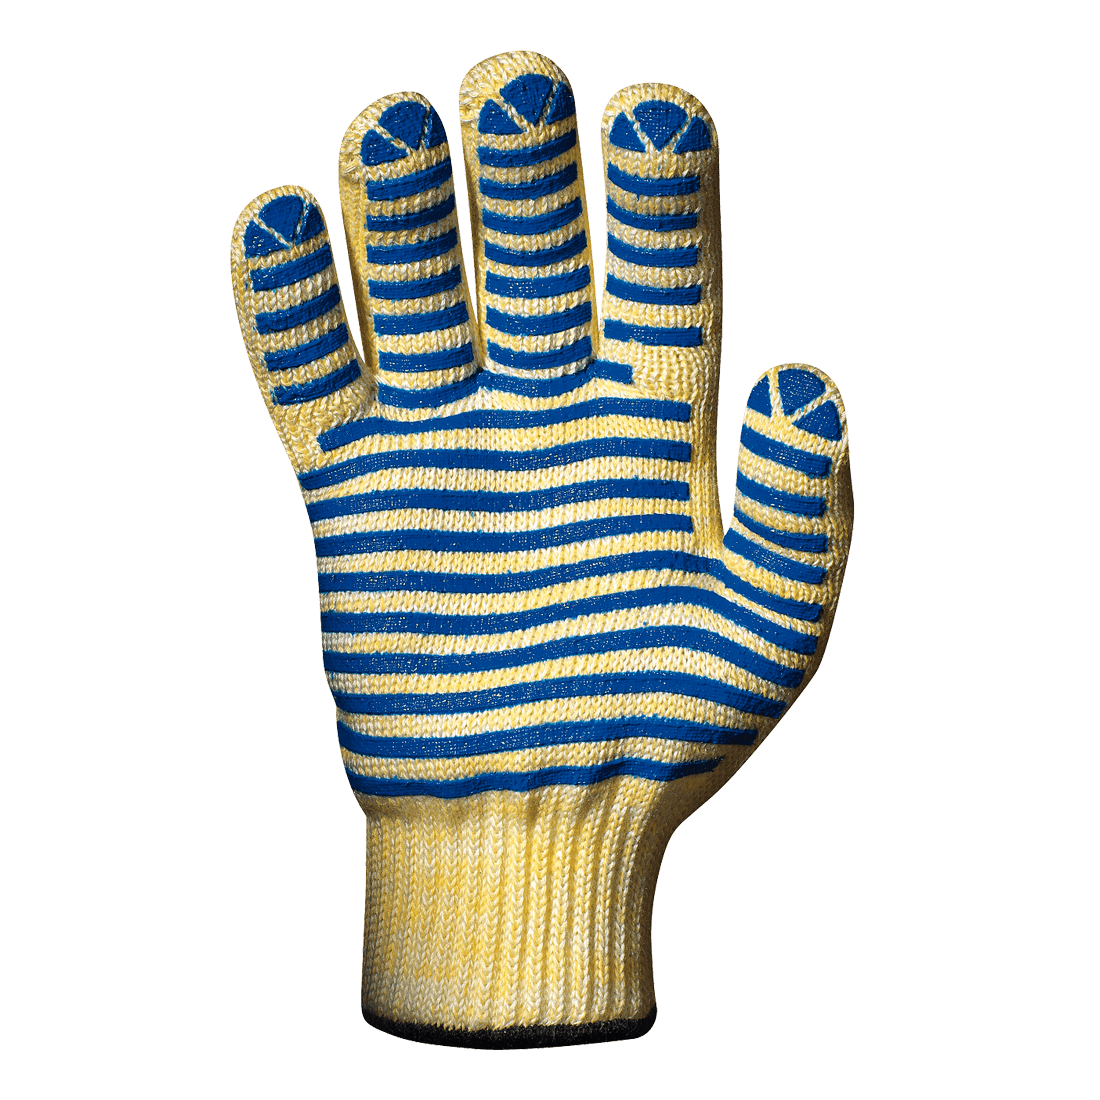 Heat Gloves Archives - SEPS